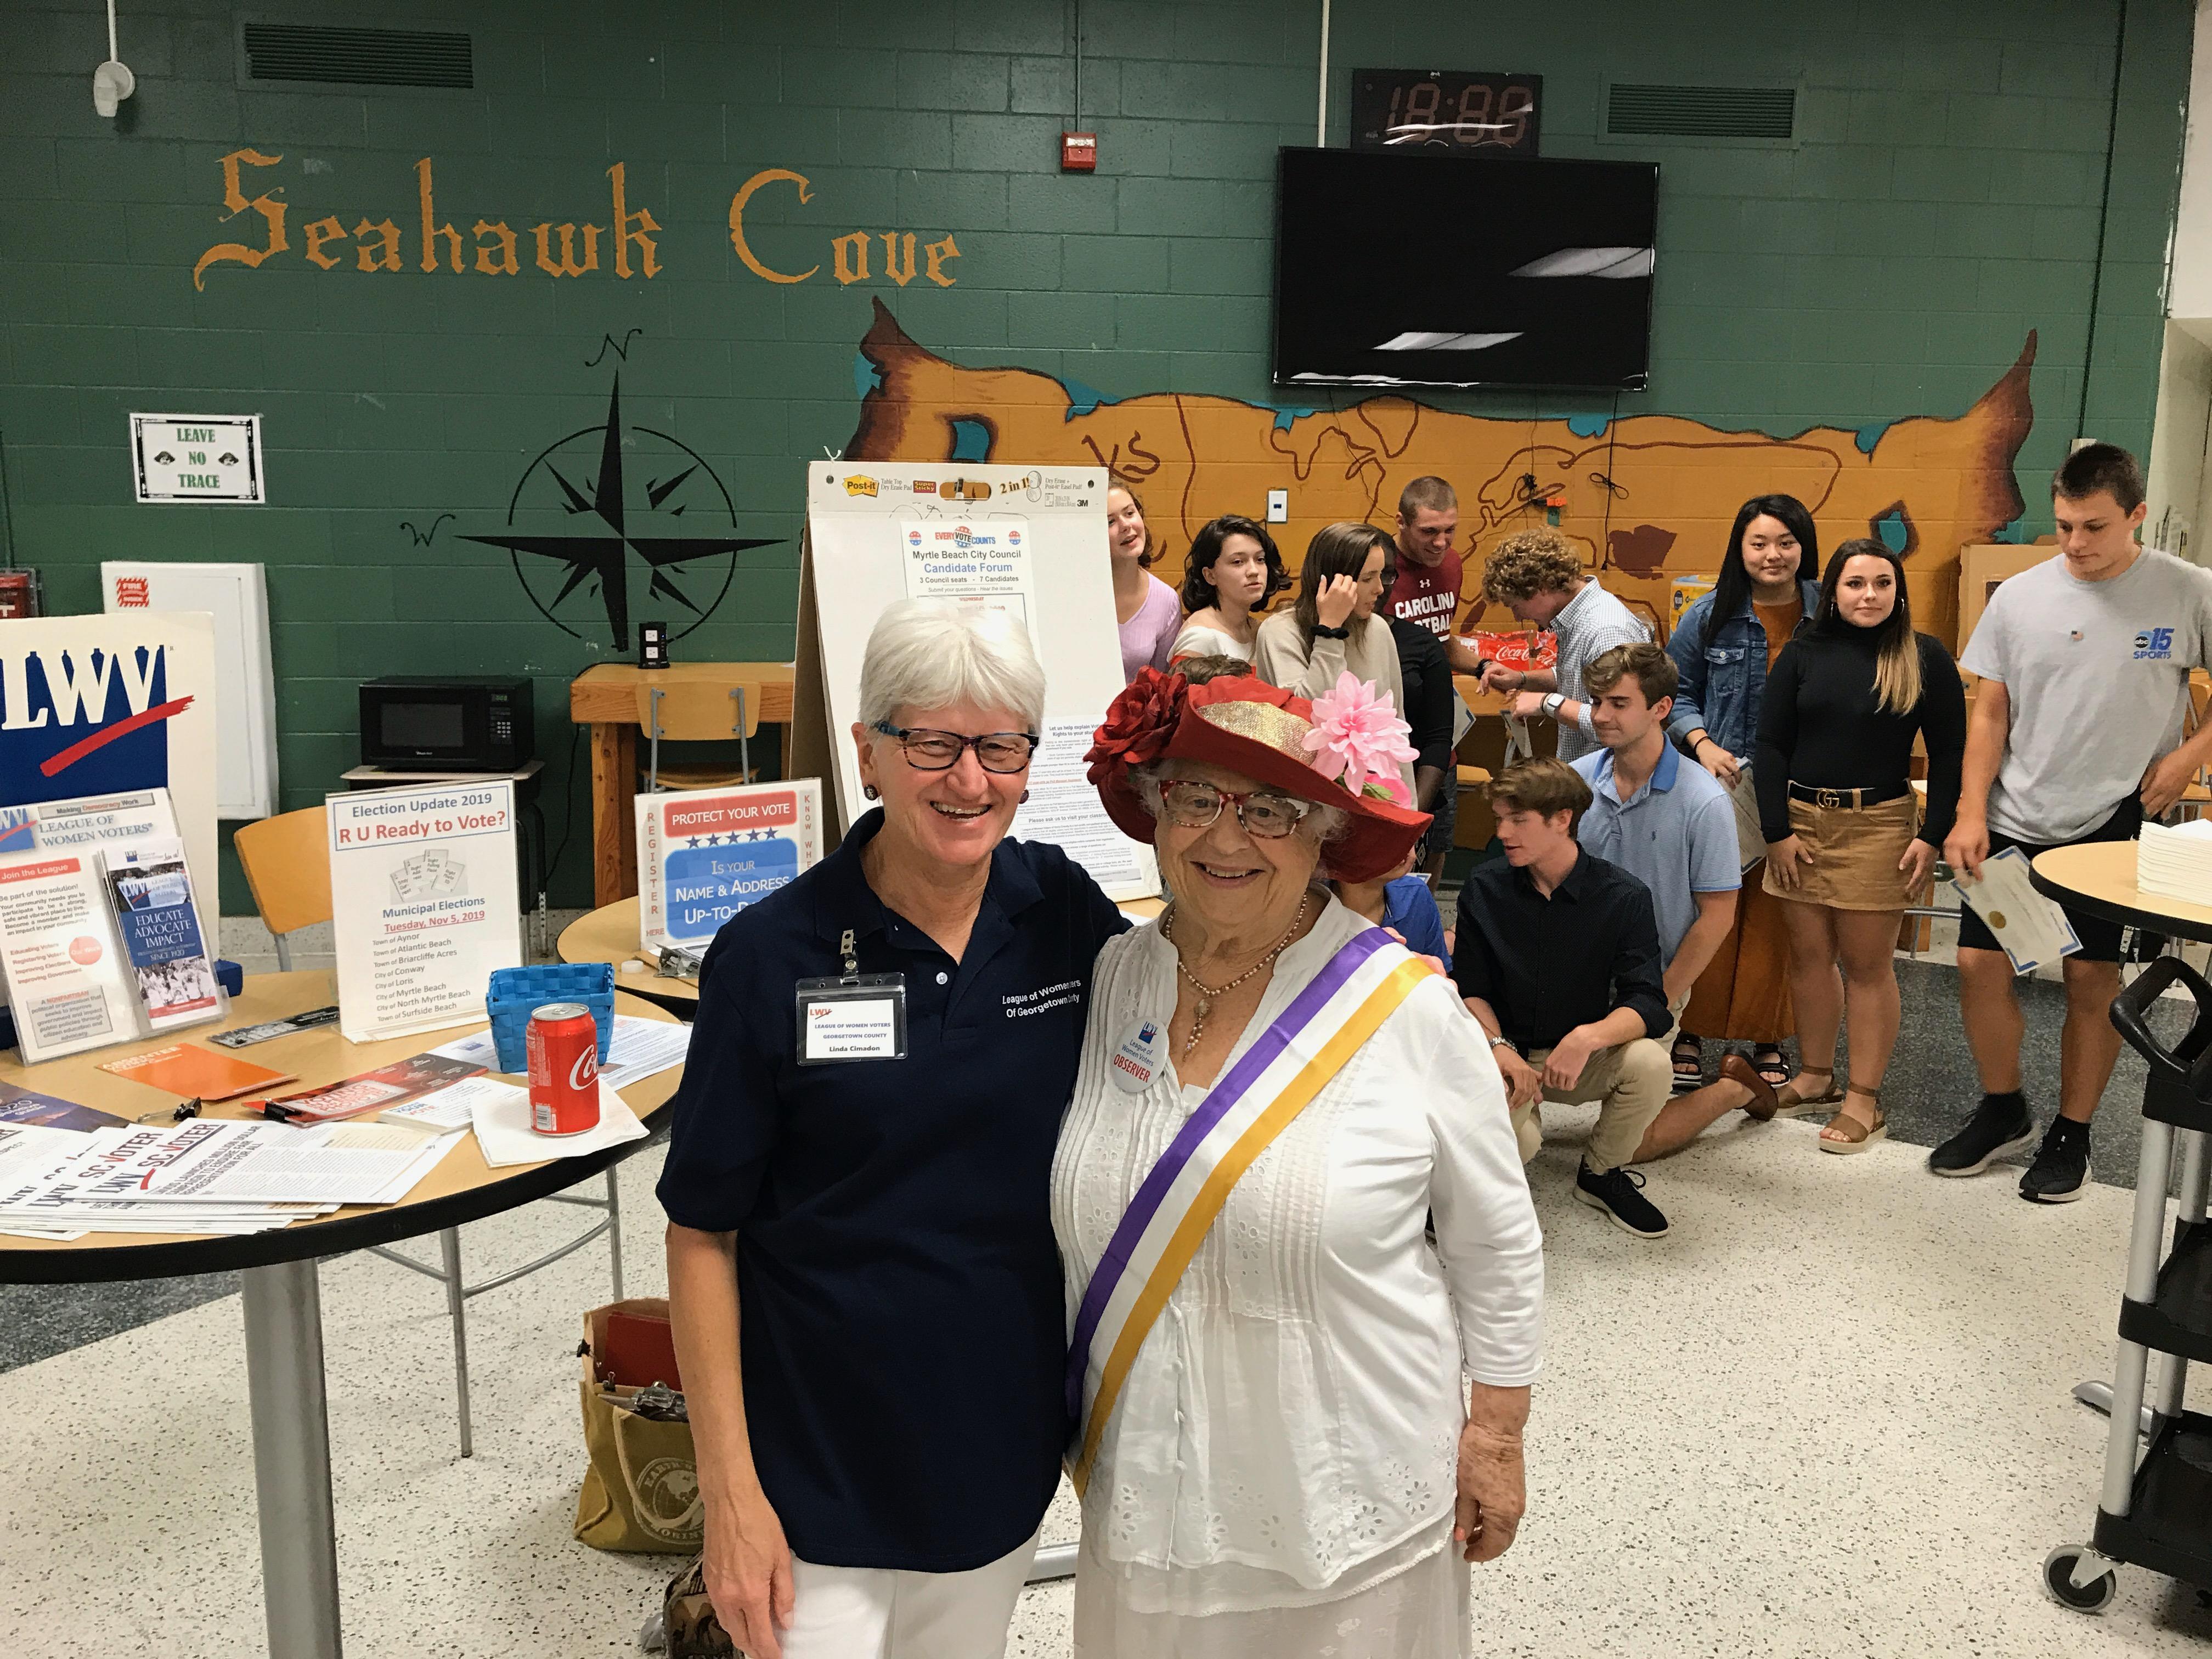 Oct 16 - Horry & Georgetown LWV members present Voter Information to Myrtle Beach High School Honor Society Induction